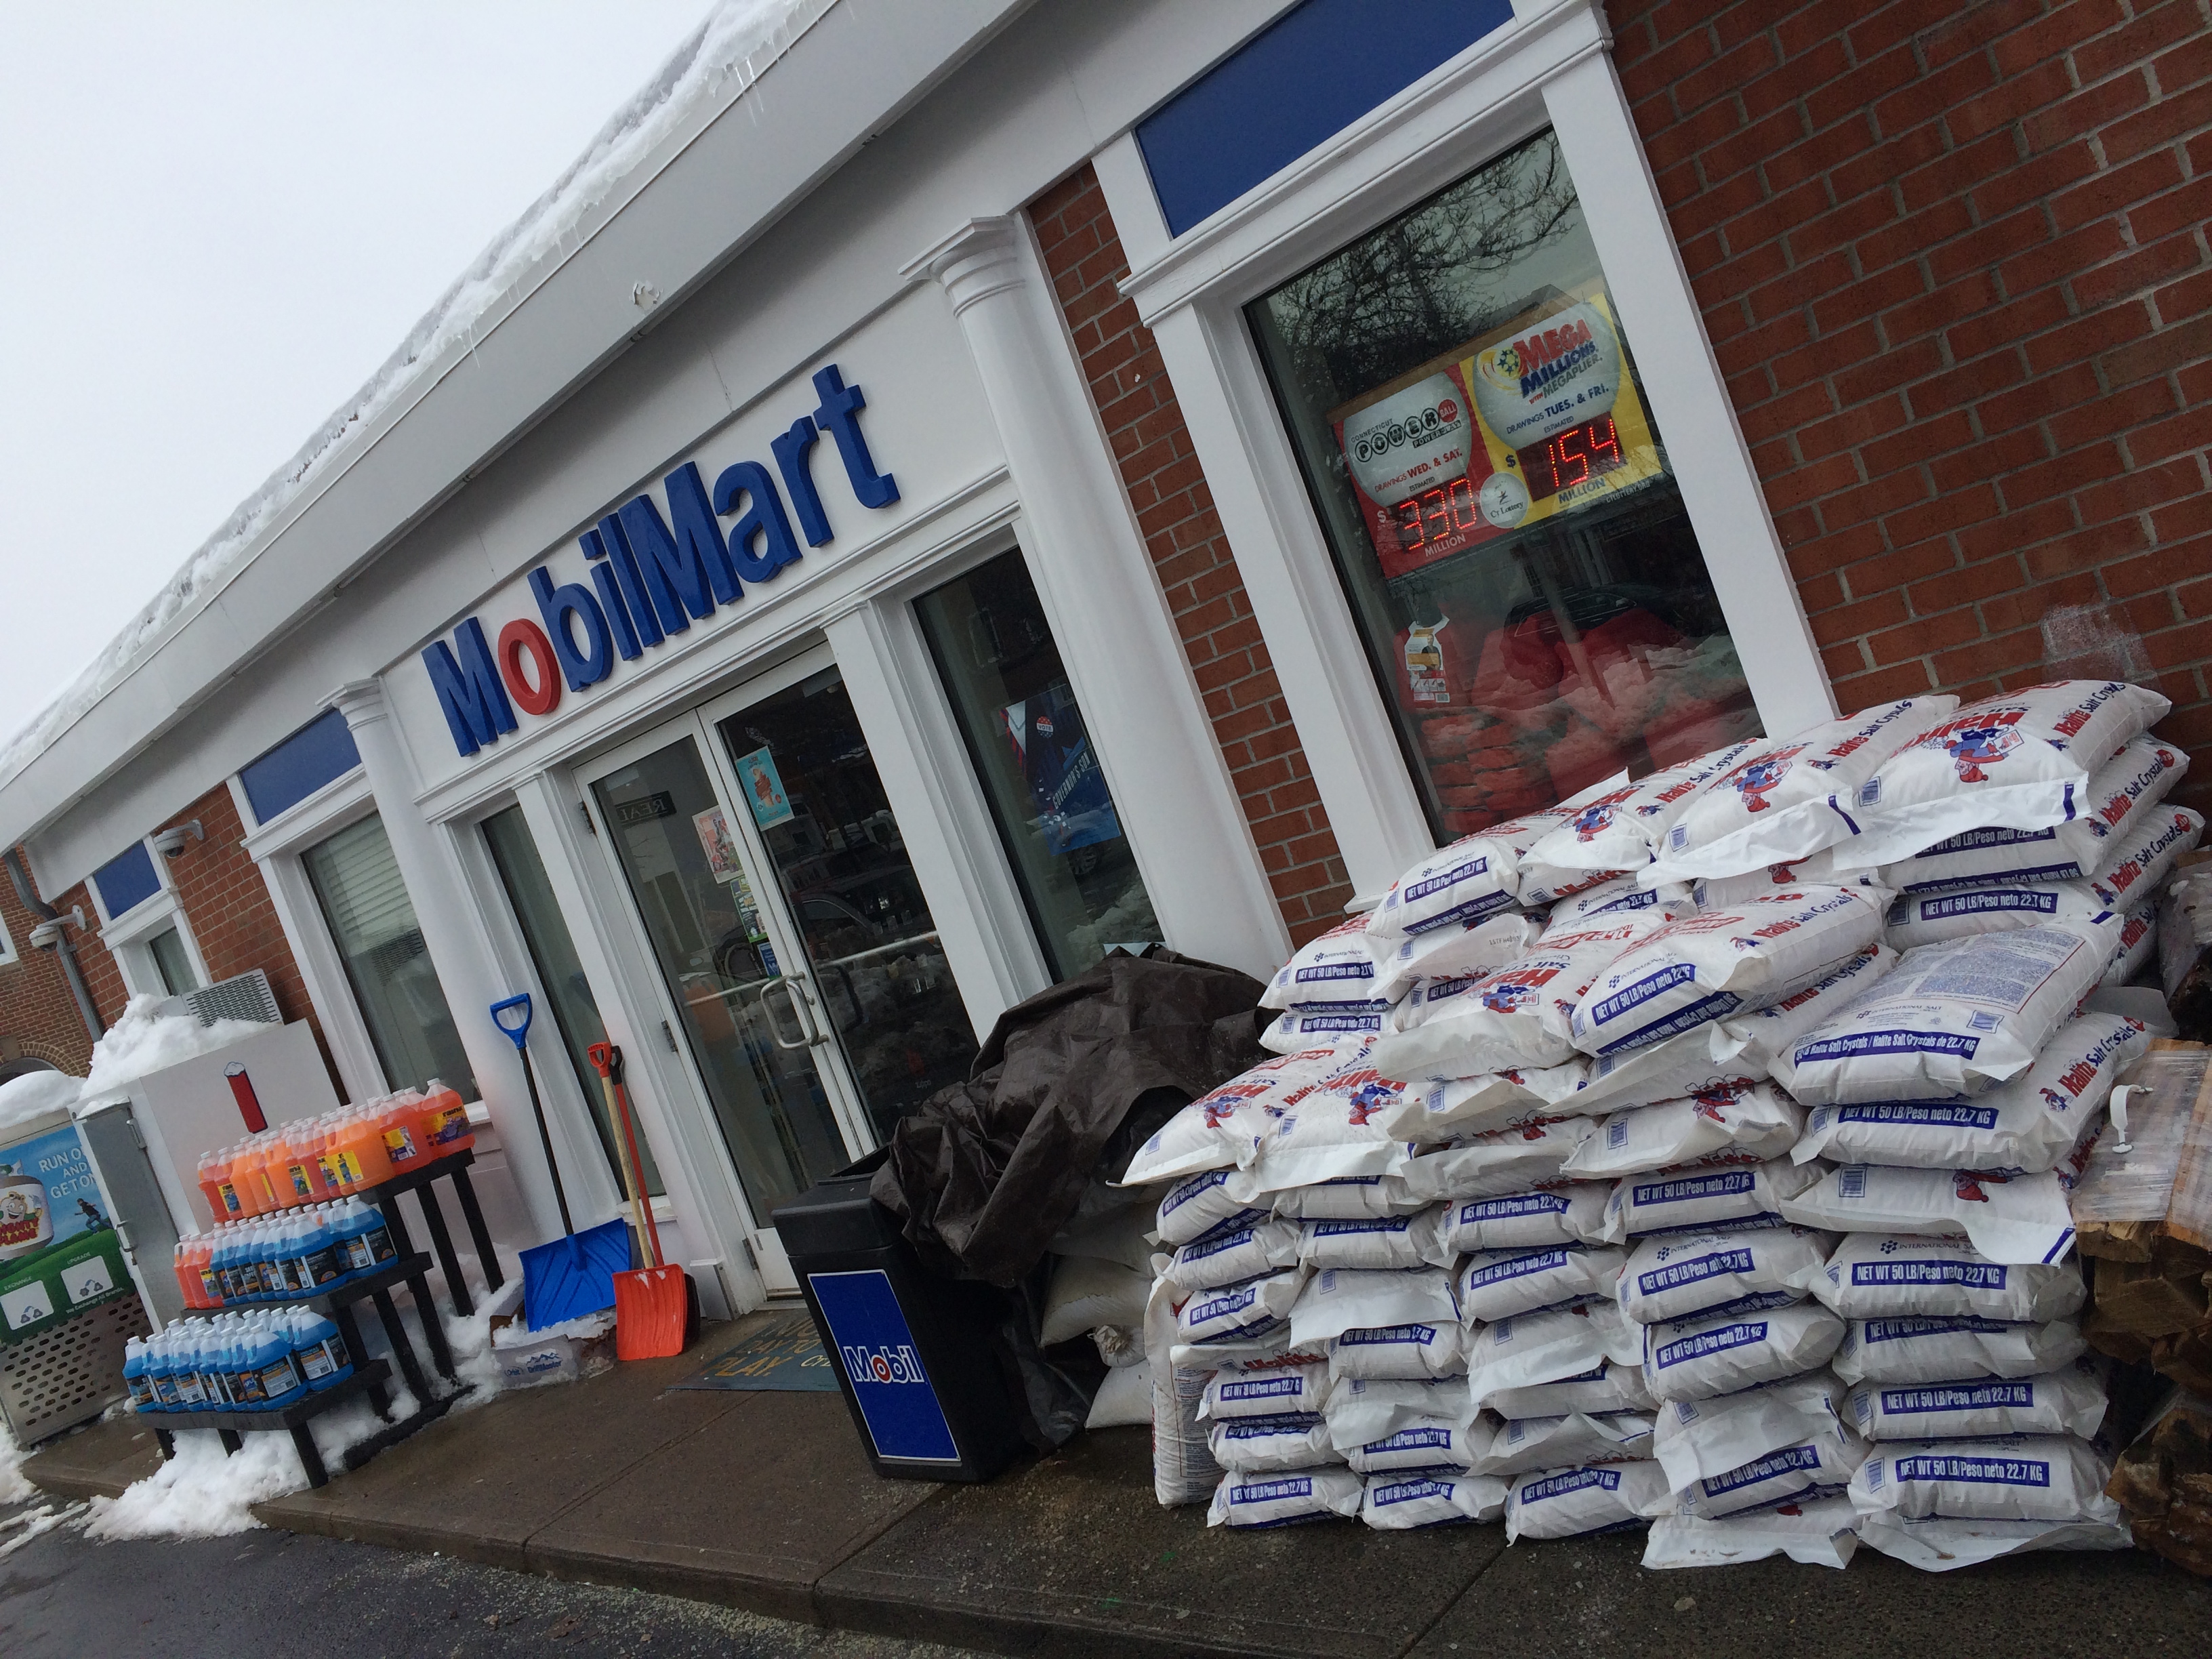 The Mobil Station also is selling rock salt. Credit: Michael Dinan